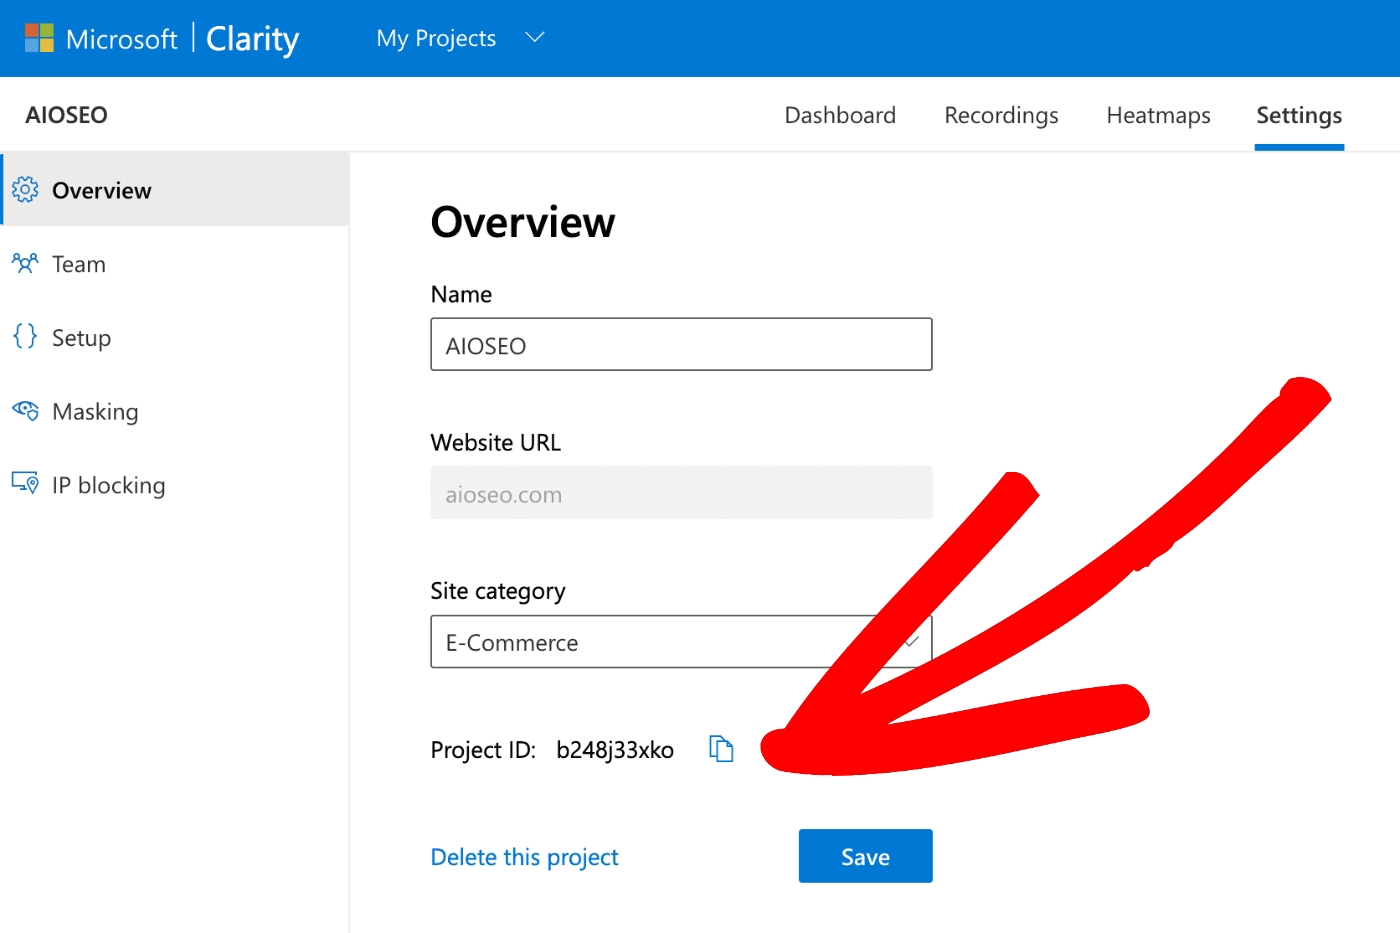 Overview screen in Microsoft Clarity showing the Project ID